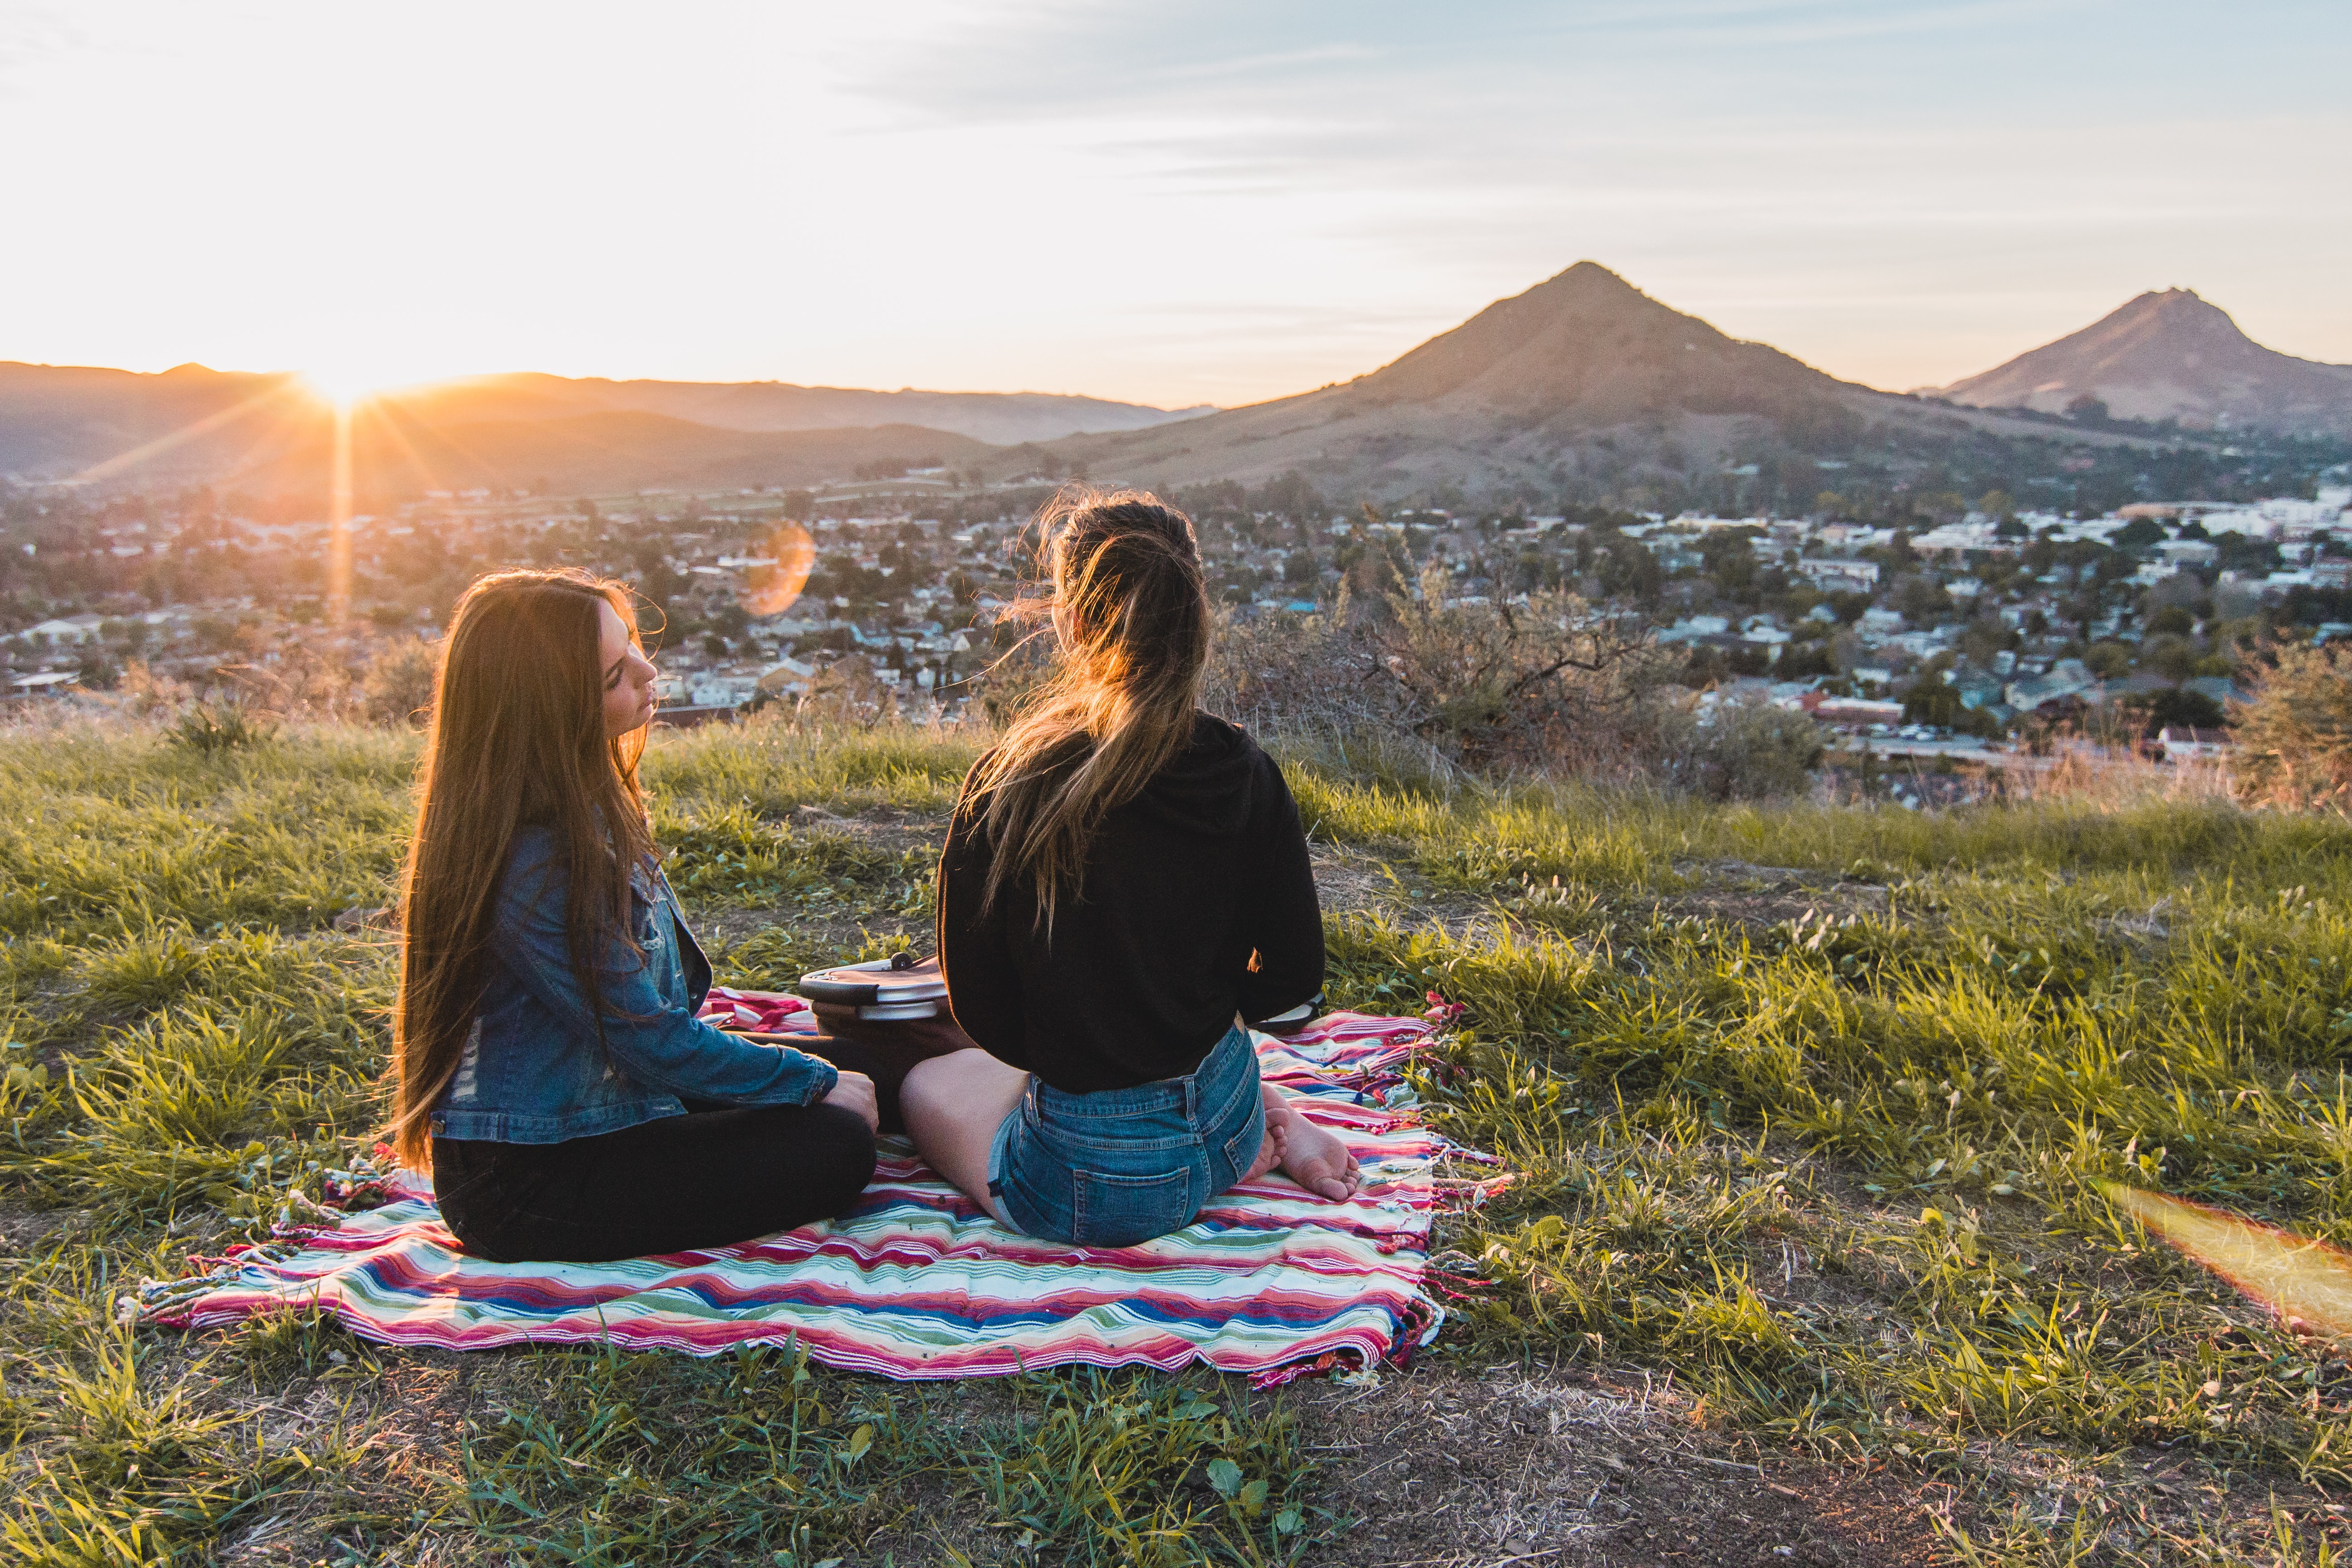 Two women sit together on a blanket at a hill overlooking their town during a sunrise.